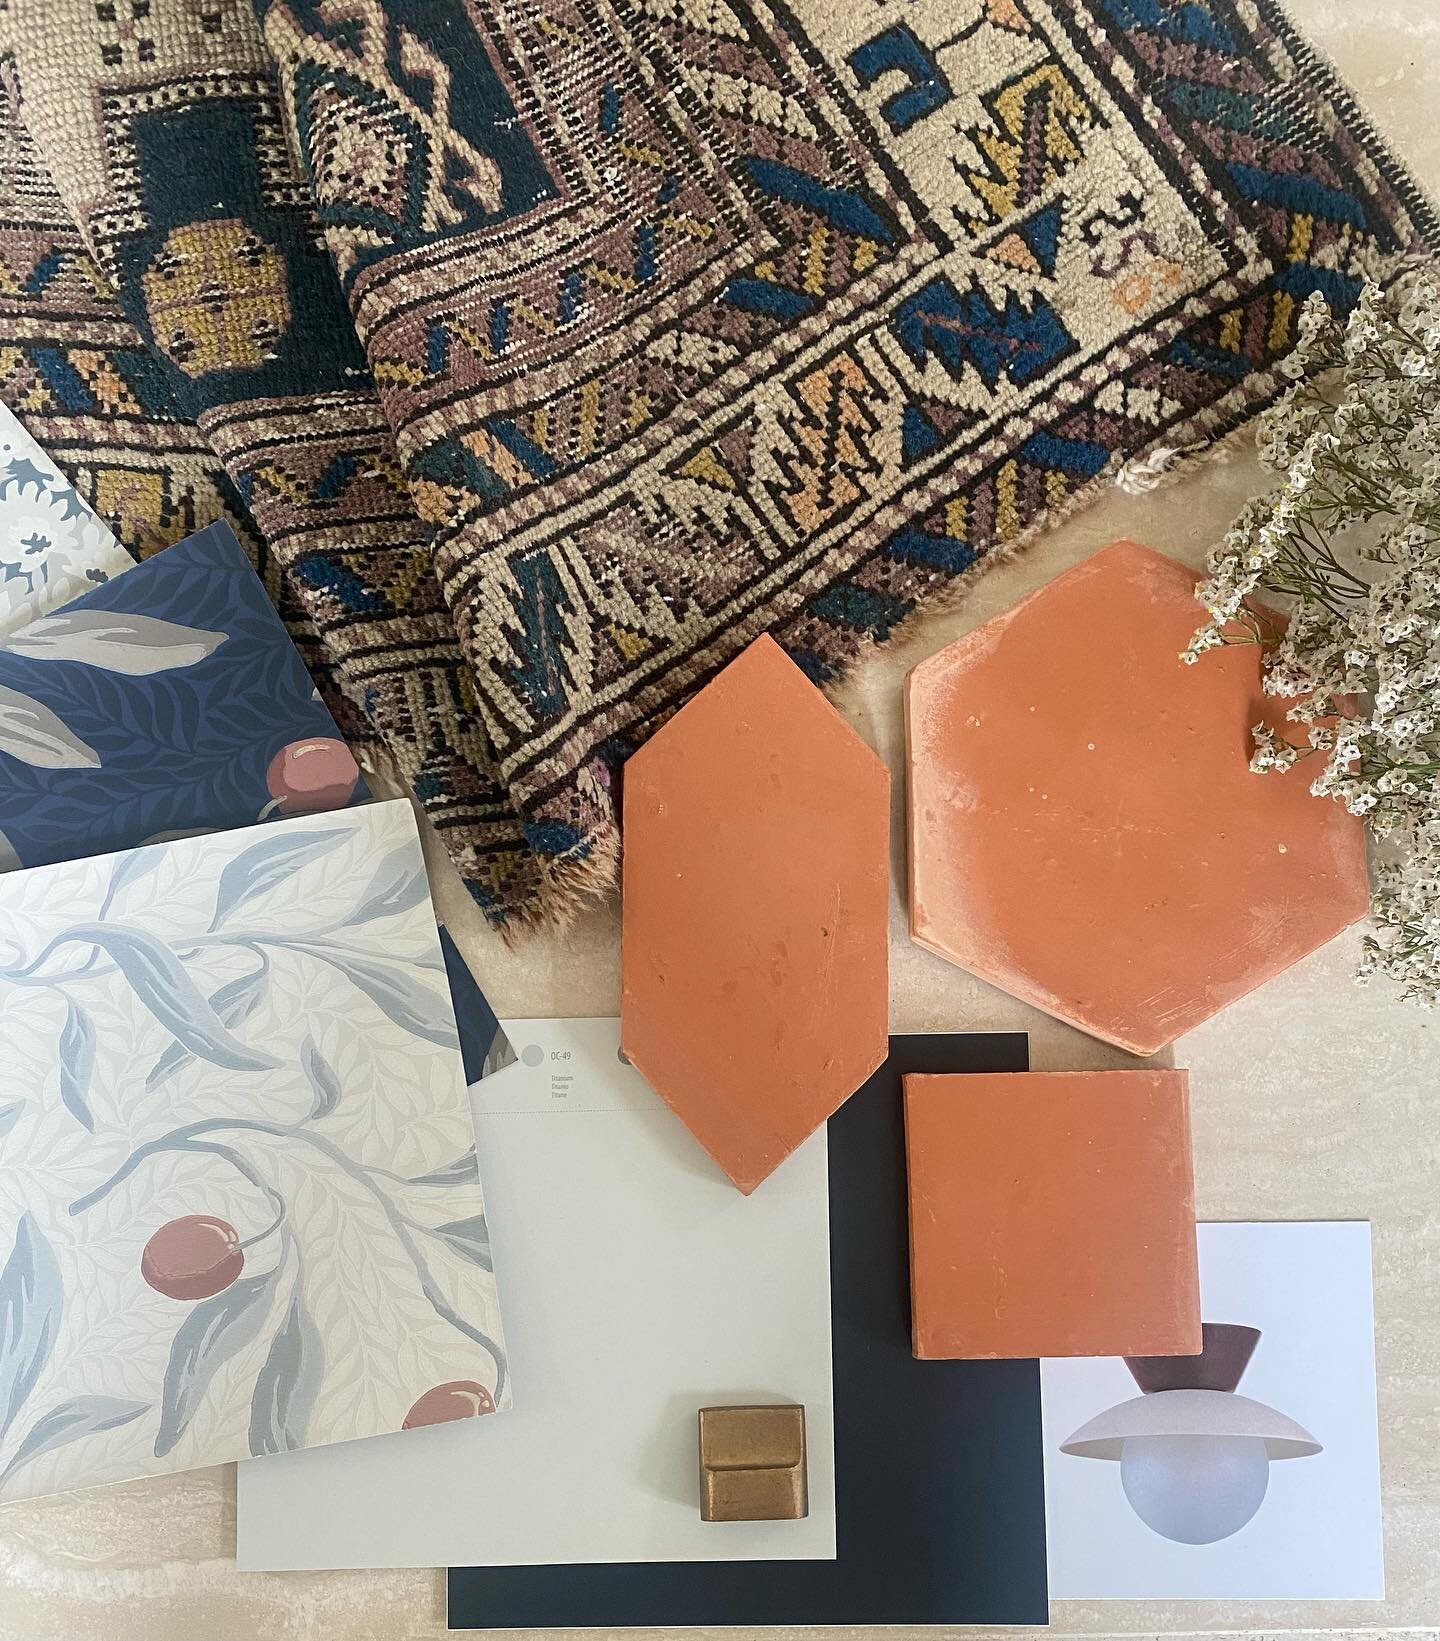 Loveliest box of hand delivered samples from @shop.terre. They align perfectly with the vision for an upcoming mudroom remodel, plus it&rsquo;s delightful to make new local friends in the industry. Nice people, nice product!